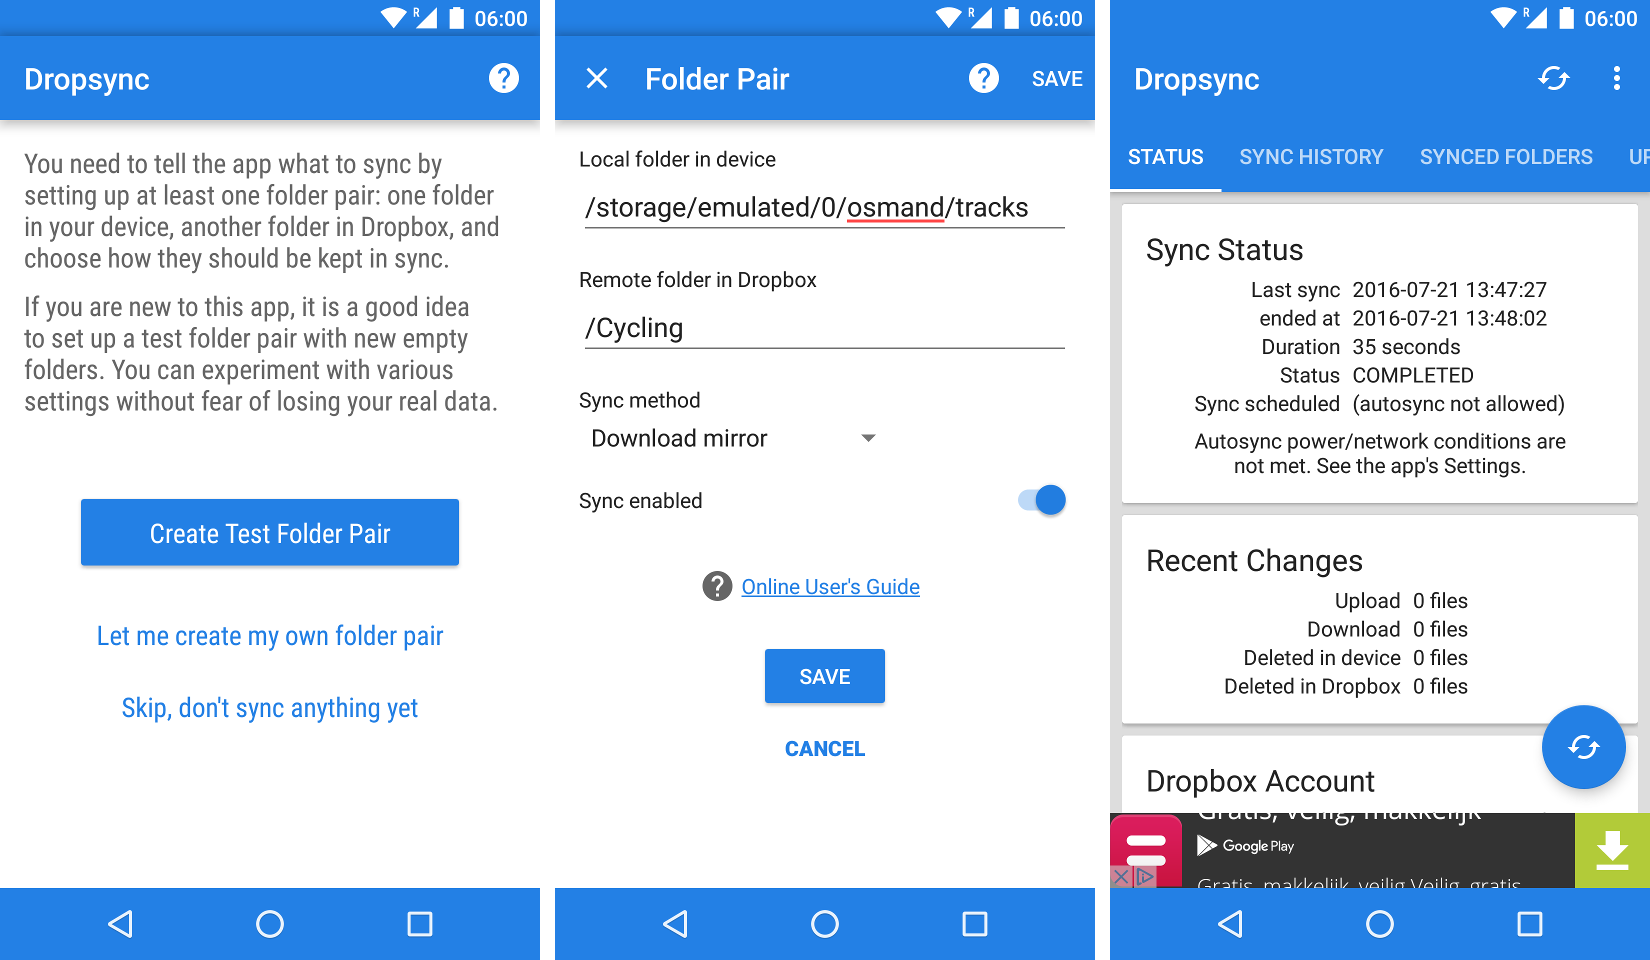 Configure Dropsync to put the GPX files in the correct folder on the Android phone